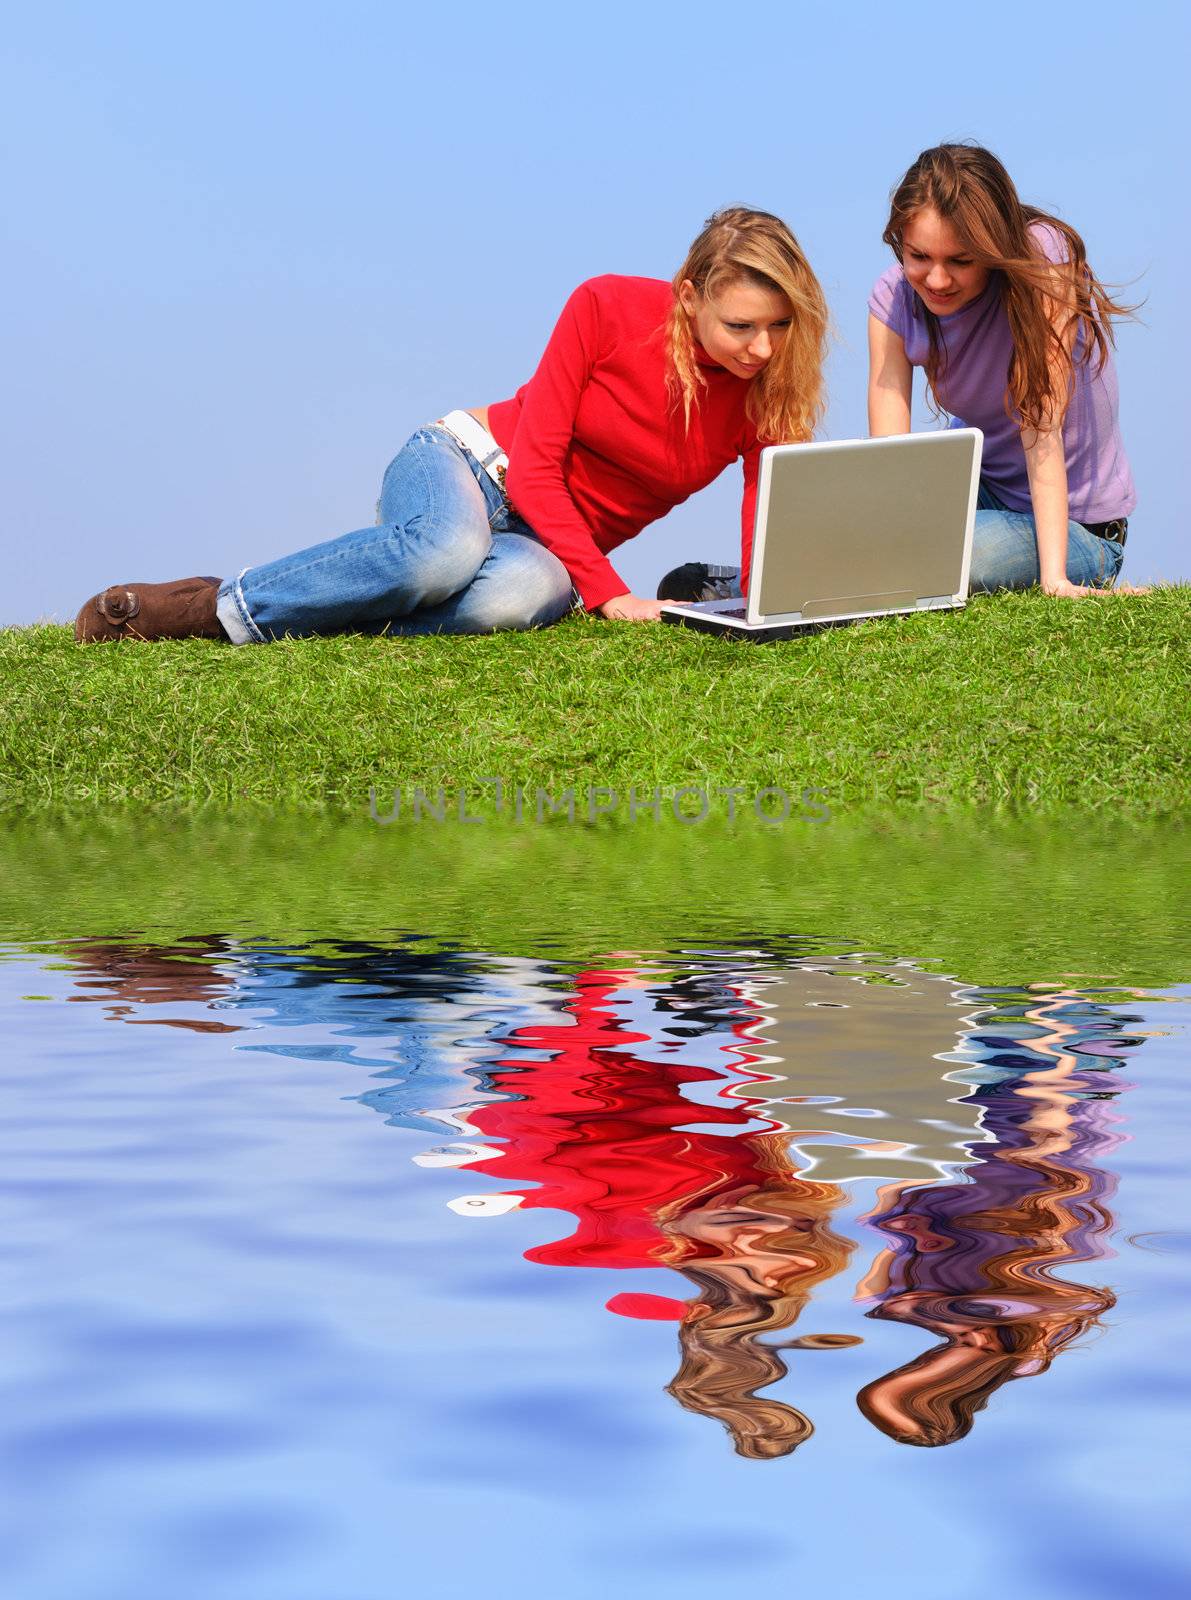 Girls with notebook sitting on grass against sky with reflection on water